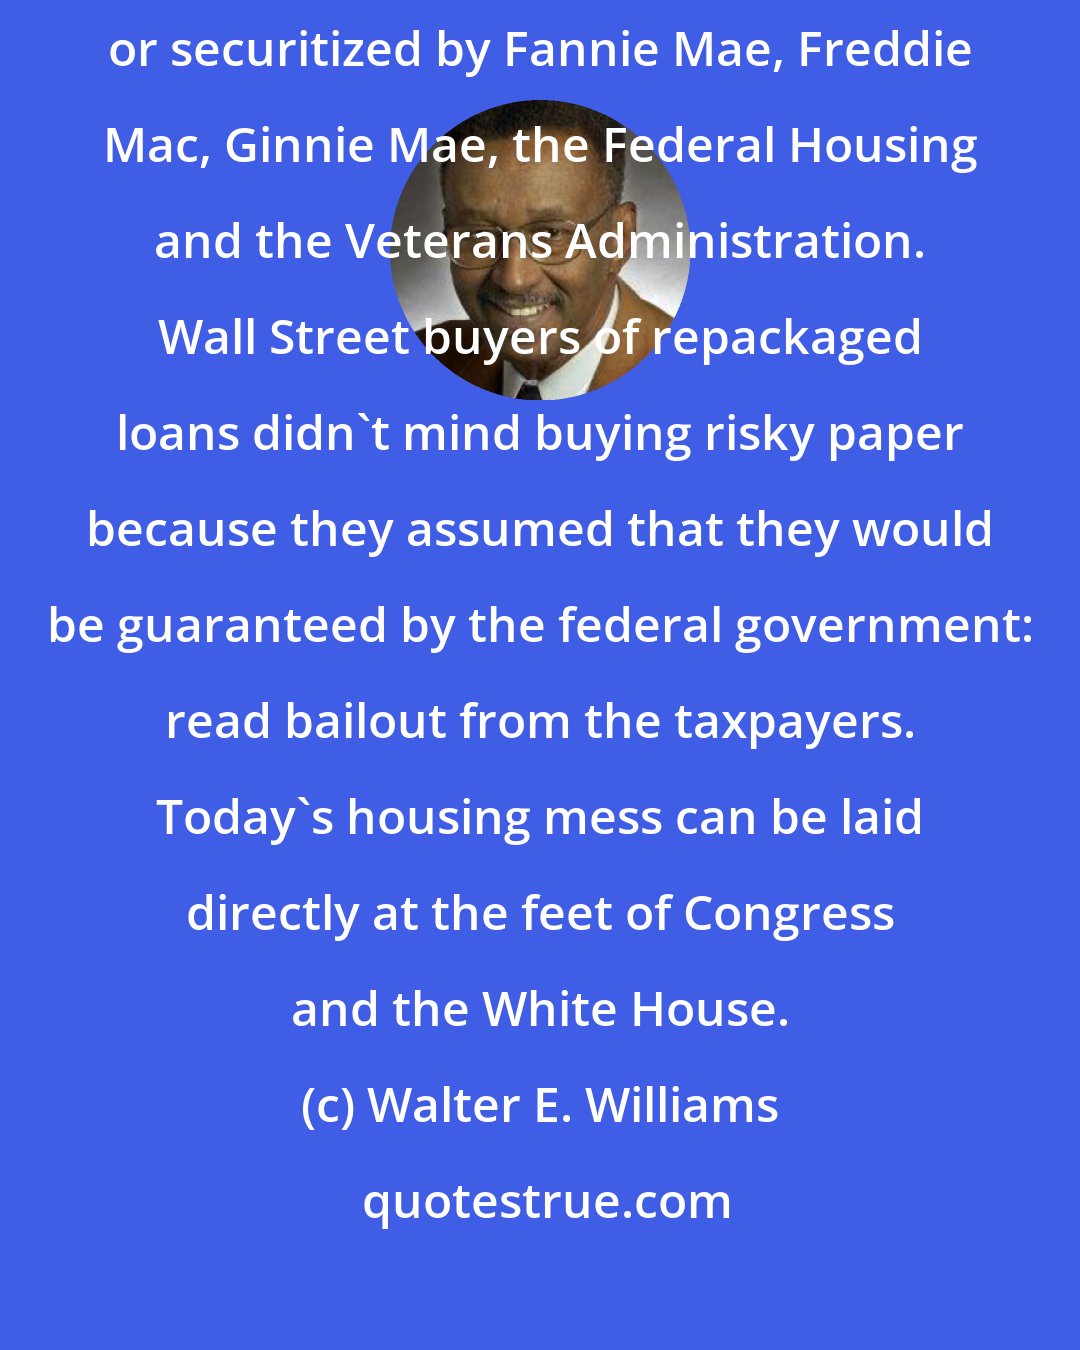 Walter E. Williams: One third of the $15 trillion of mortgages in existence in 2008 are owned, or securitized by Fannie Mae, Freddie Mac, Ginnie Mae, the Federal Housing and the Veterans Administration. Wall Street buyers of repackaged loans didn't mind buying risky paper because they assumed that they would be guaranteed by the federal government: read bailout from the taxpayers. Today's housing mess can be laid directly at the feet of Congress and the White House.